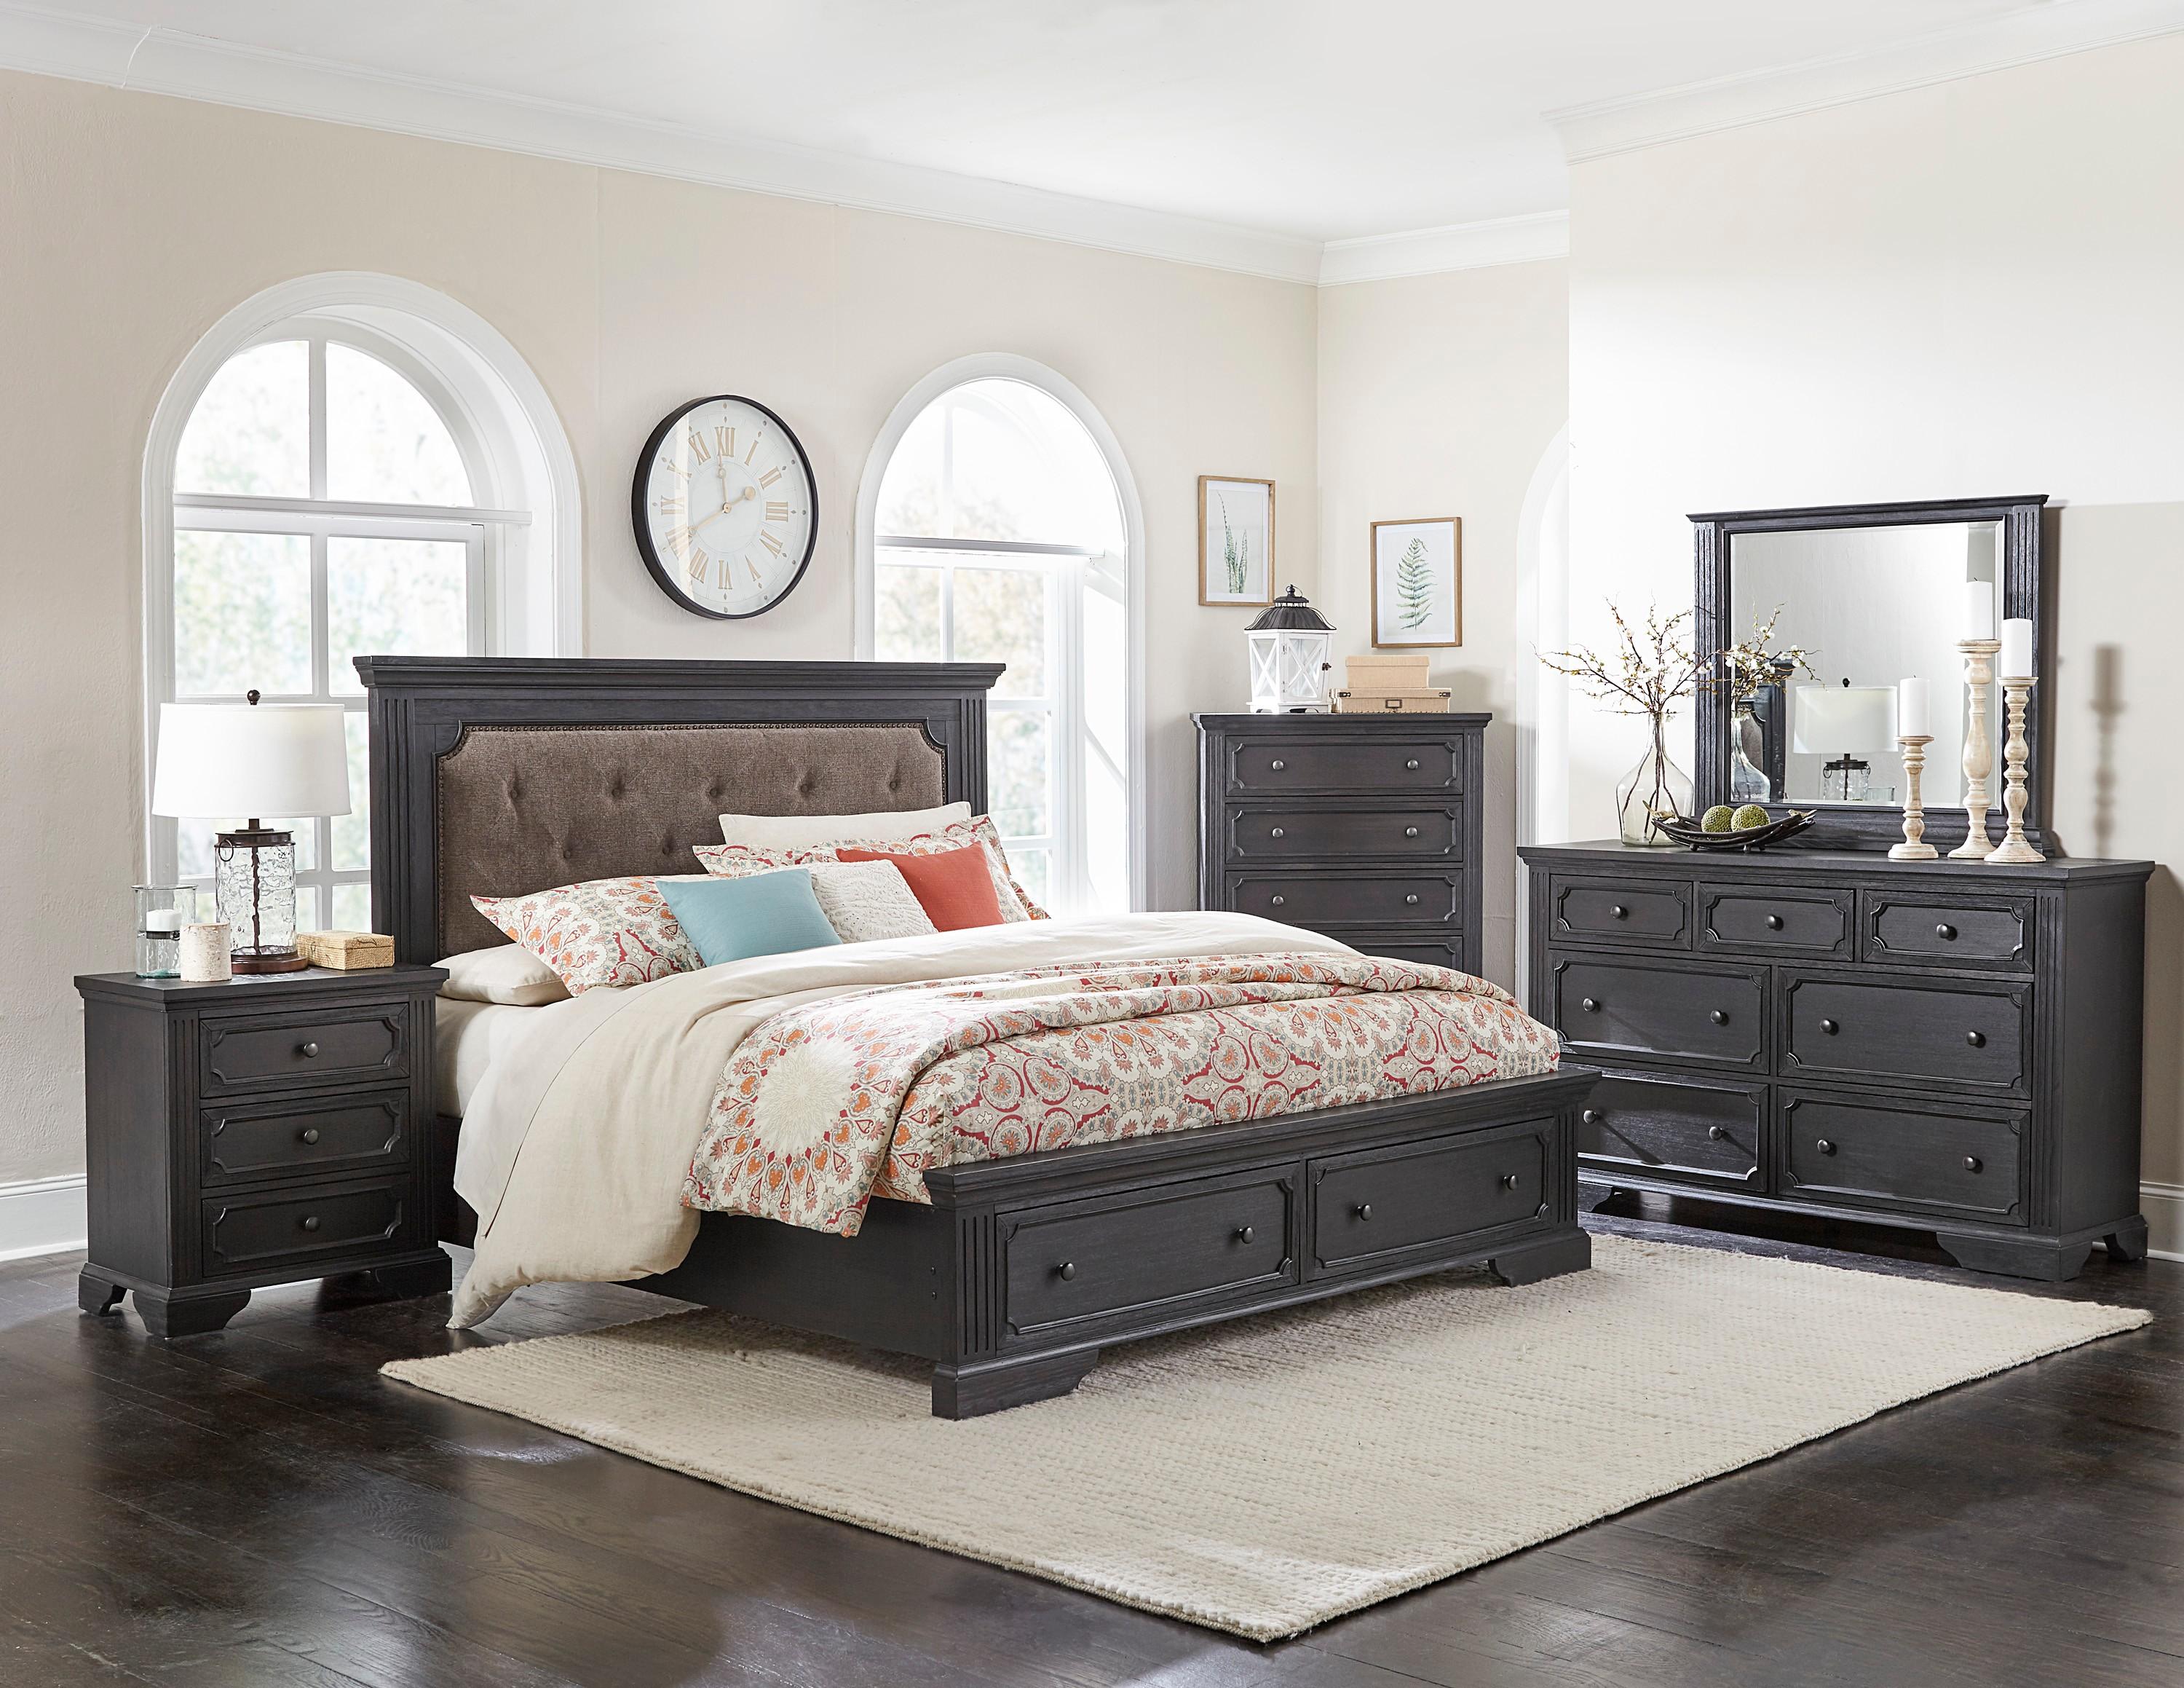 Rustic Bedroom Set 1647-1-5PC Bolingbrook 1647-1-5PC in Charcoal Polyester